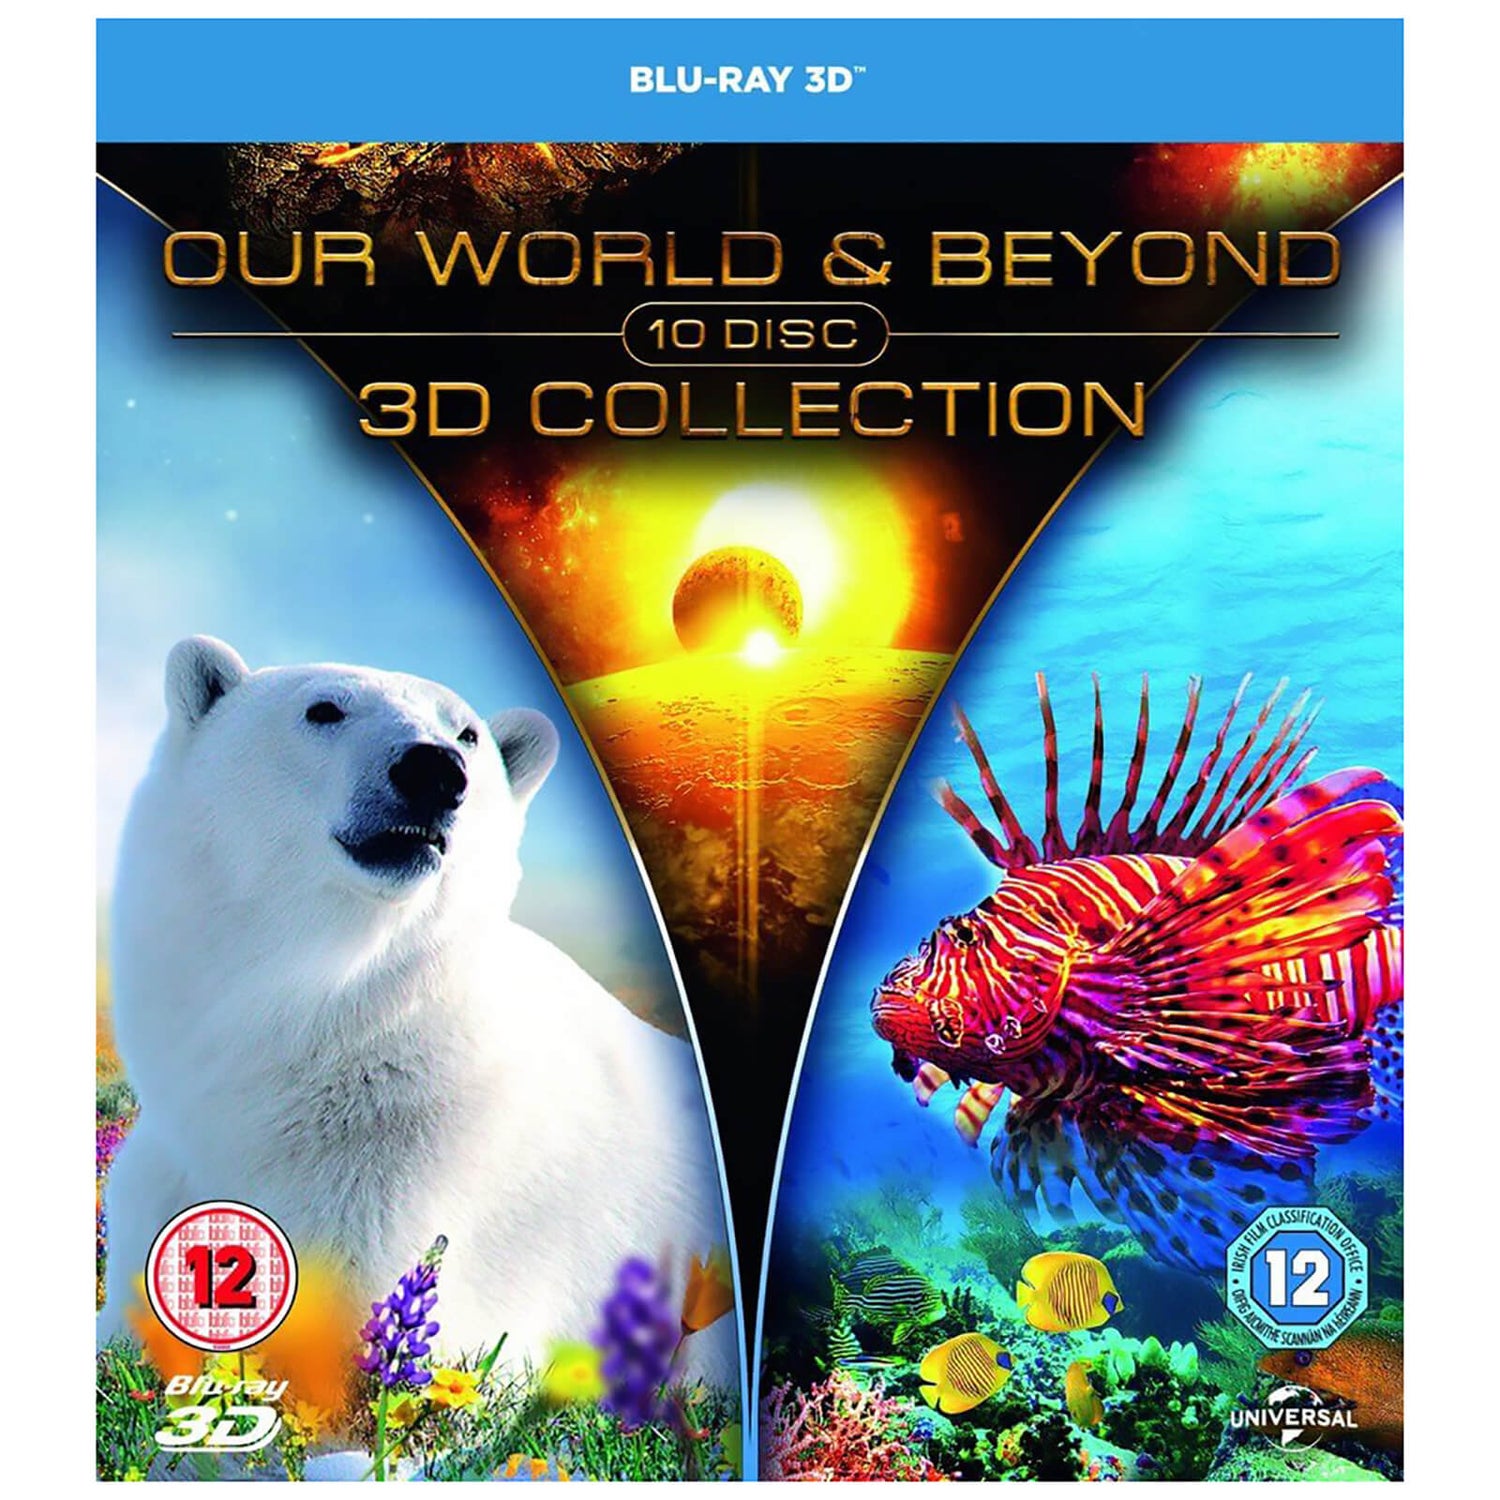 Our World & Beyond 3D Collection 